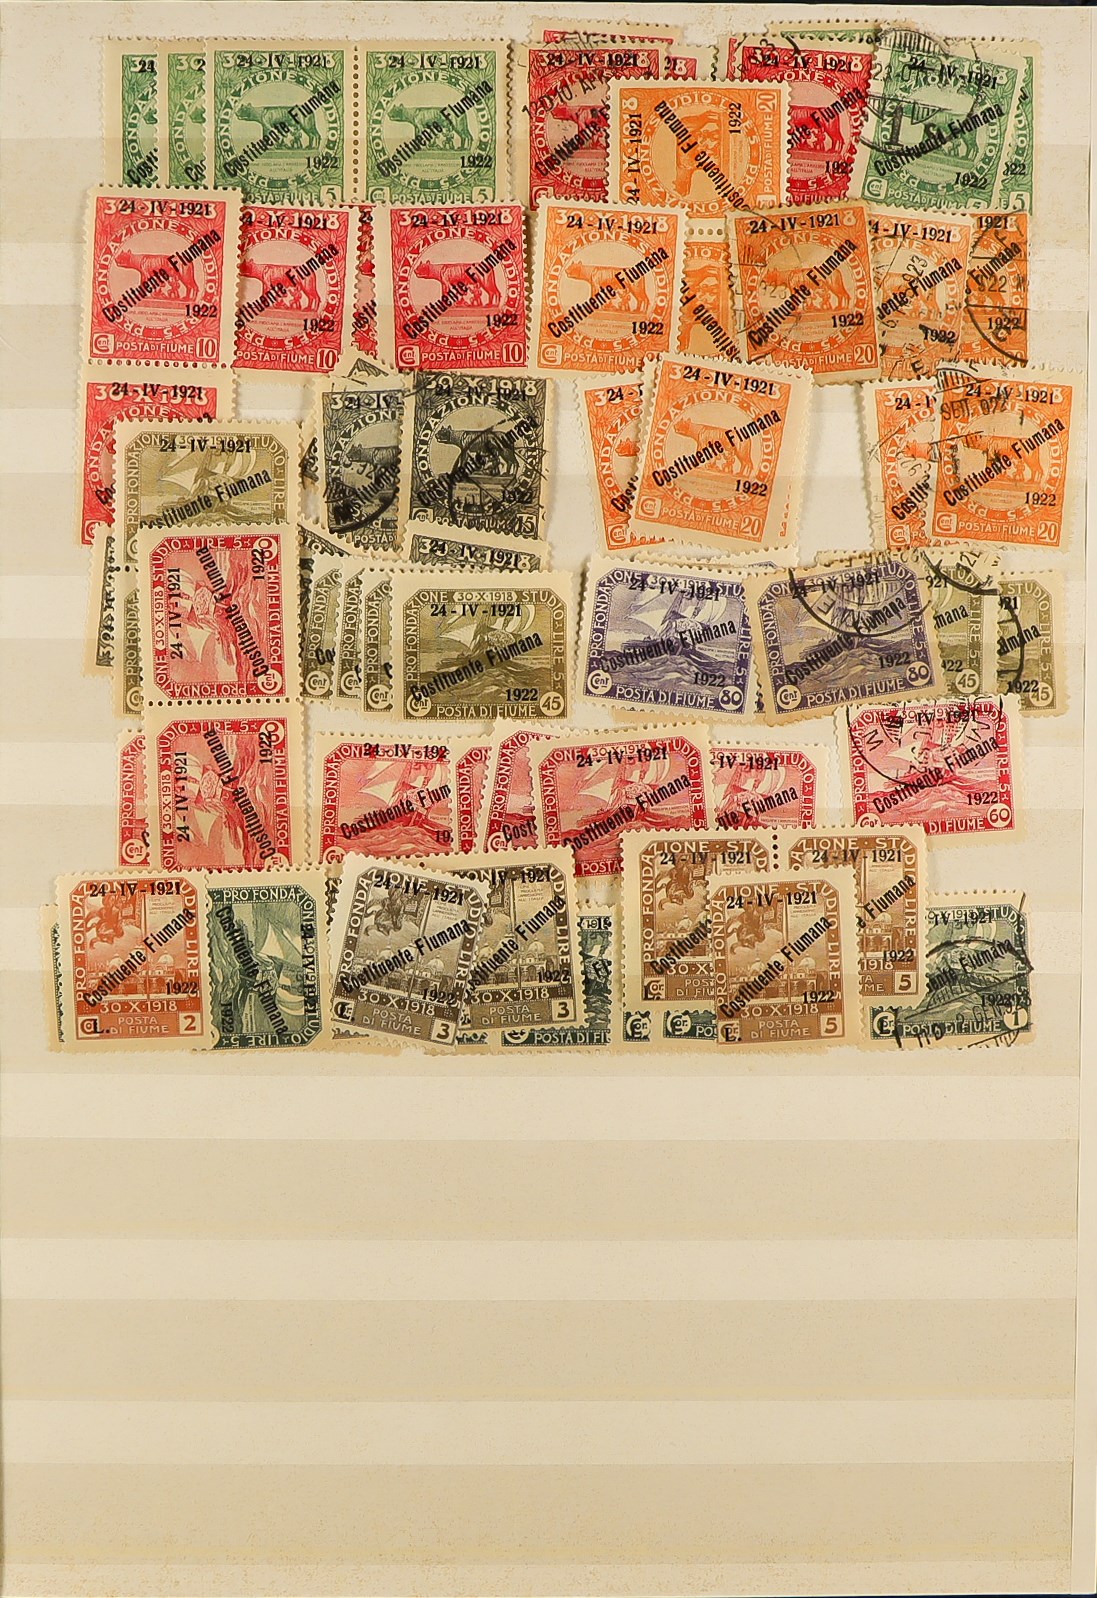 FIUME 1918 - 1924 ACCUMULATION of around 1500 mint & used stamps in stockbook, various overprints on - Image 9 of 29